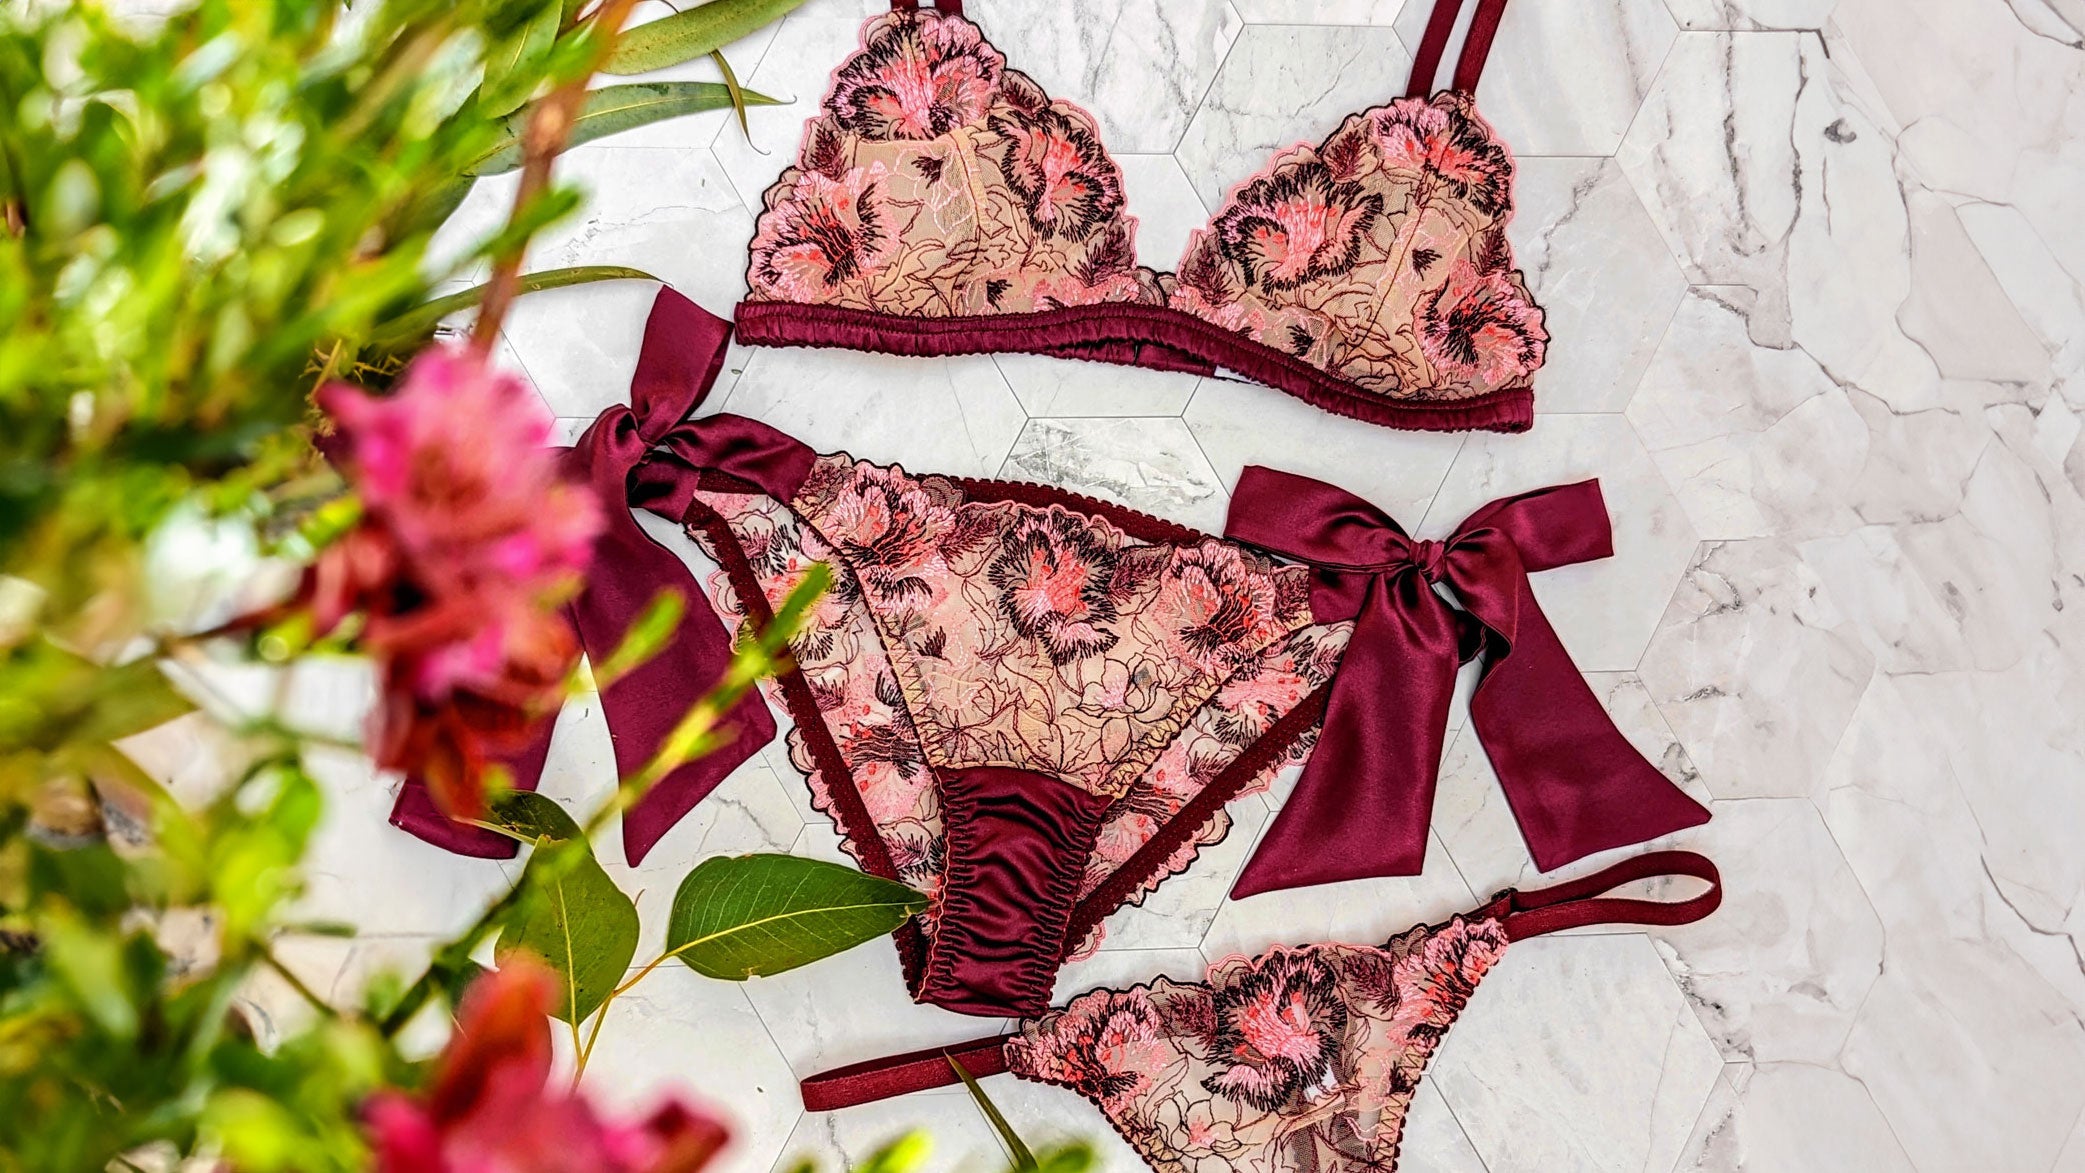 Silk and embroidered lingerie sets with sheer floral embroidery